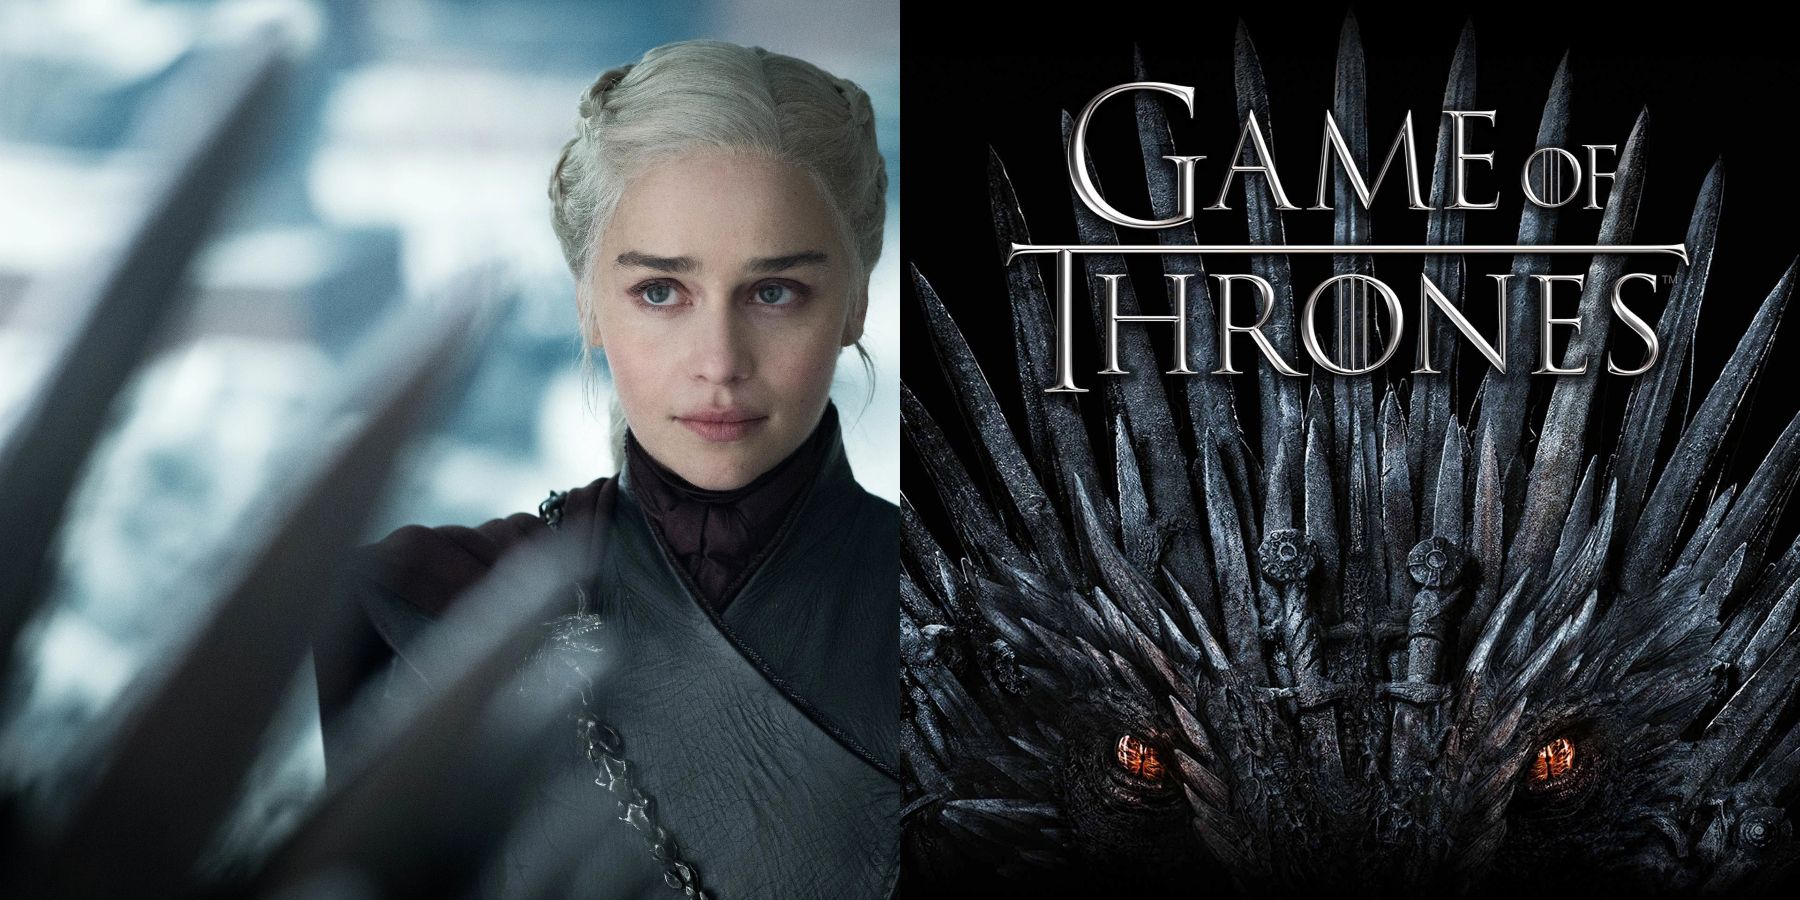 Emilia Clarke Reveals Game Of Thrones Ending She Wanted For
Daenerys